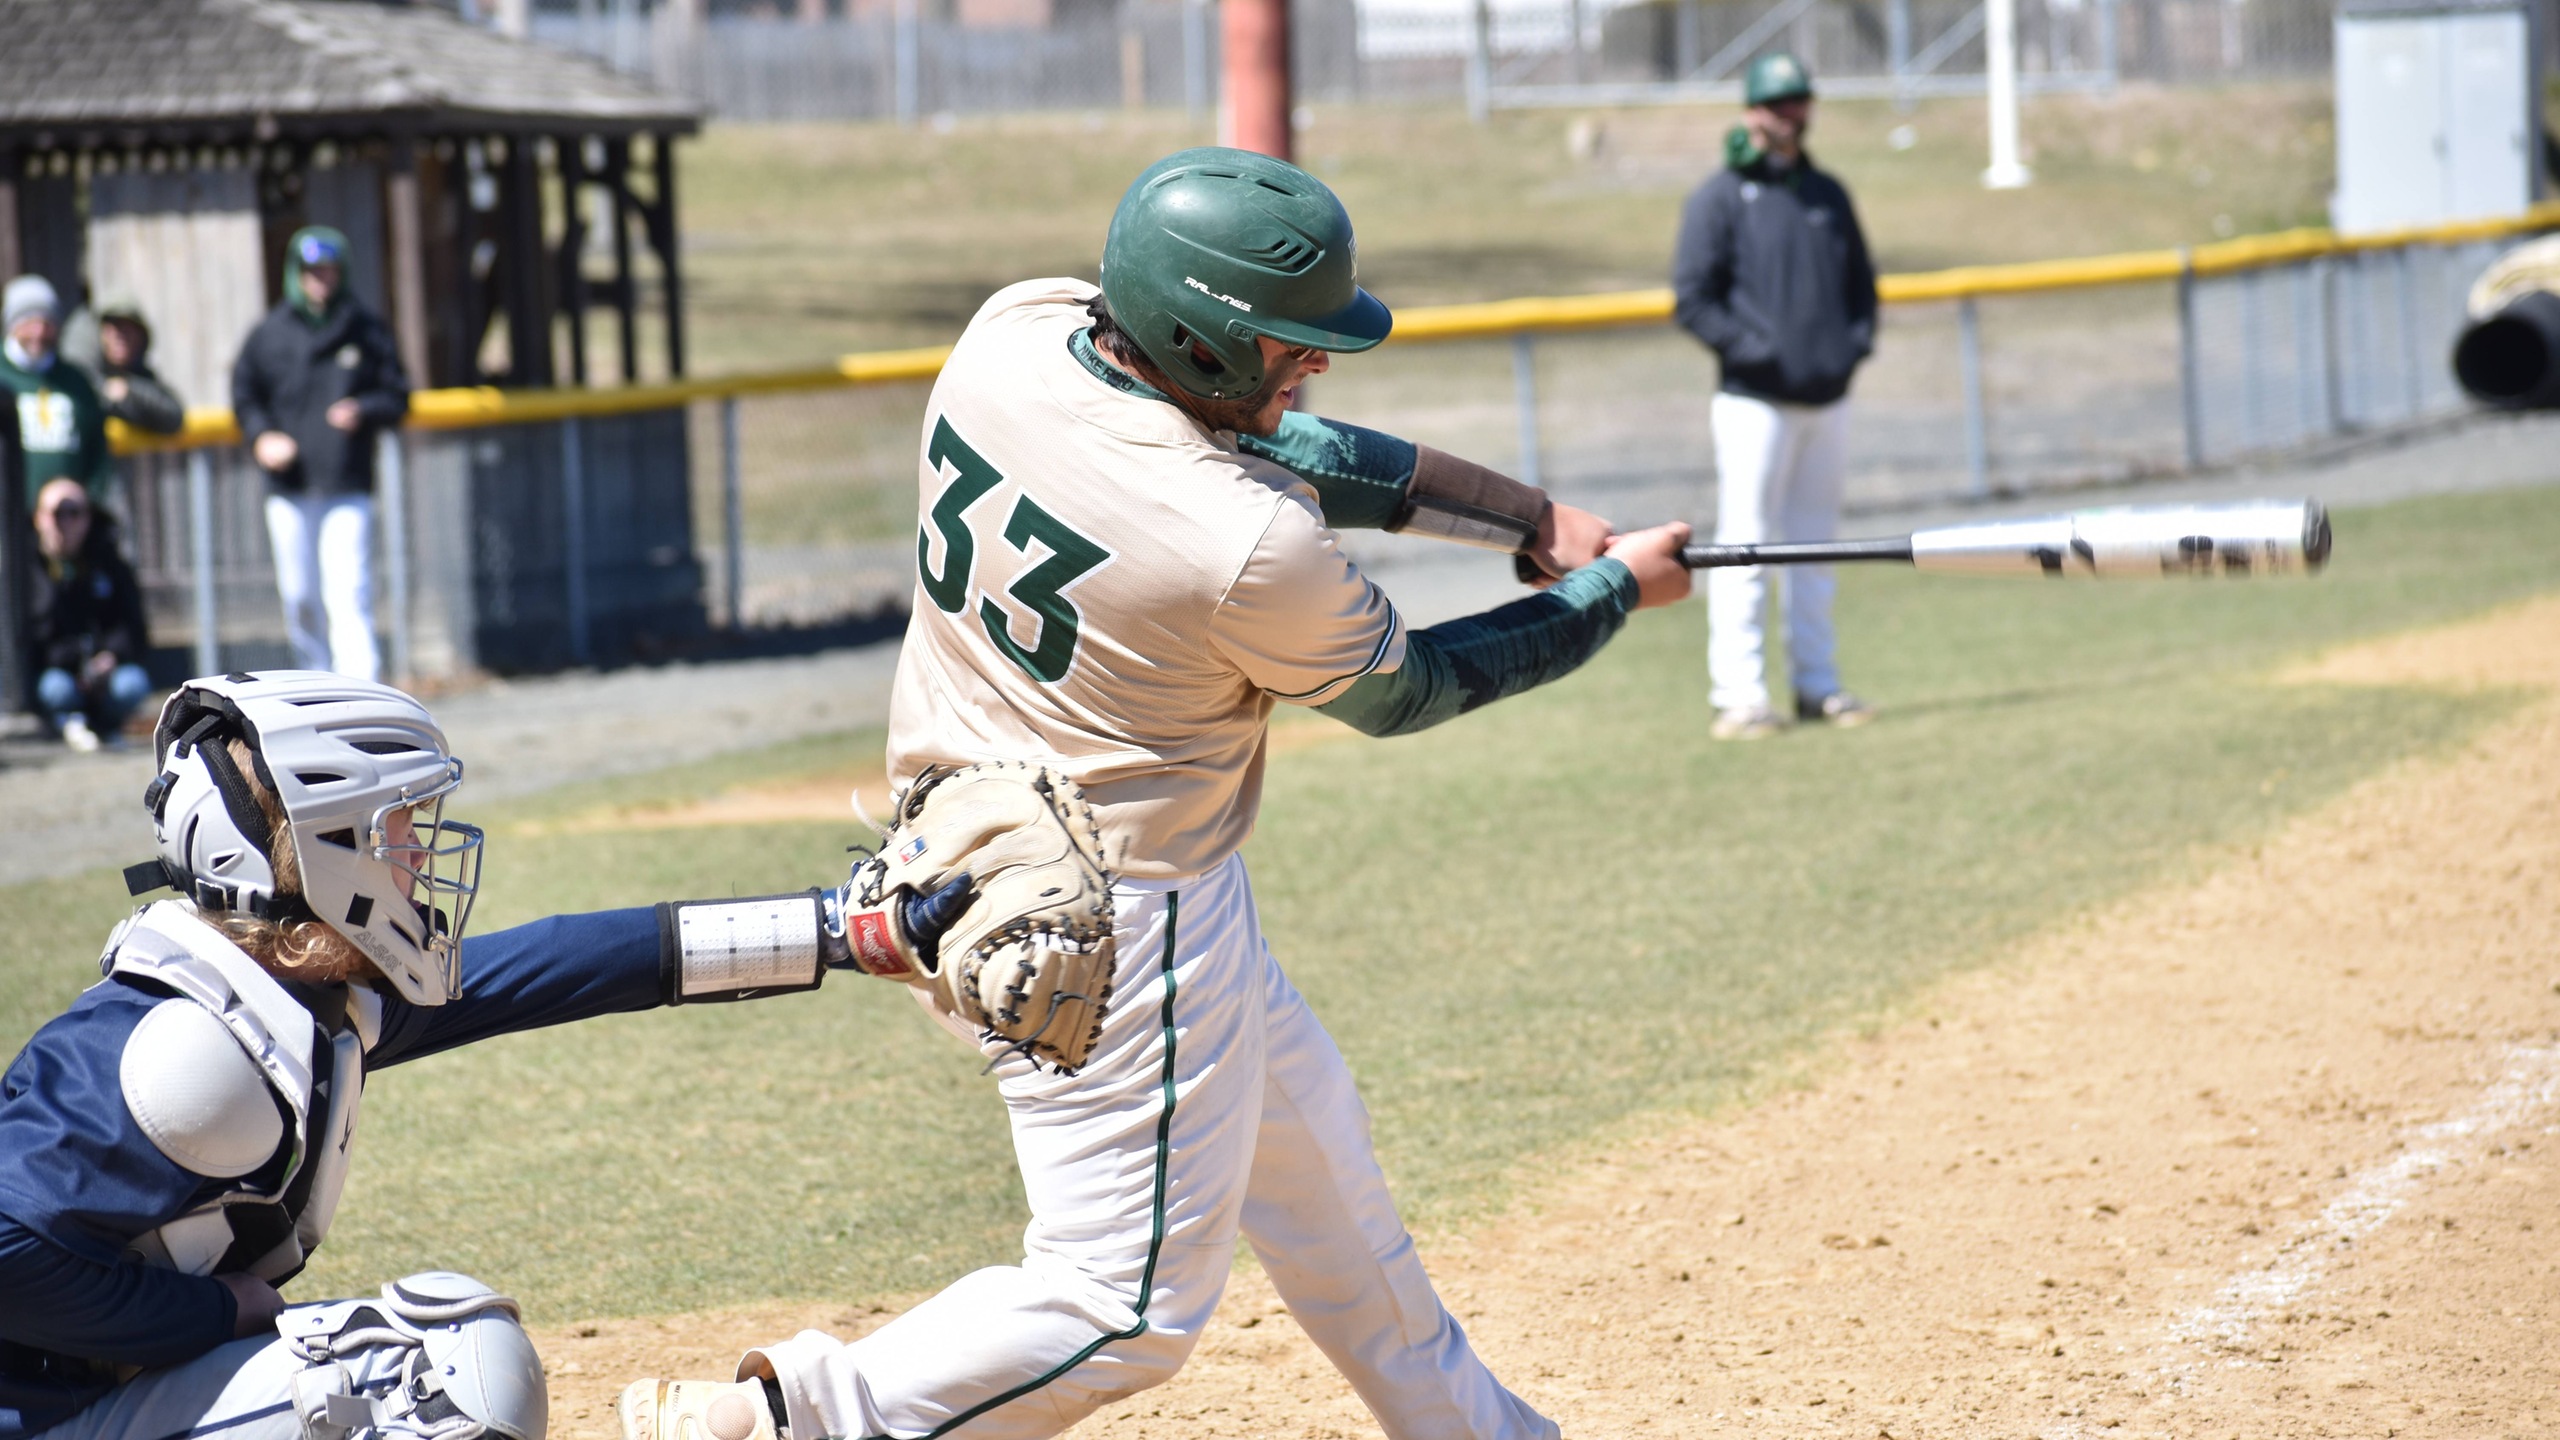 Baseball Splits Doubleheader with Chatham to Earn Their First Win of the Season